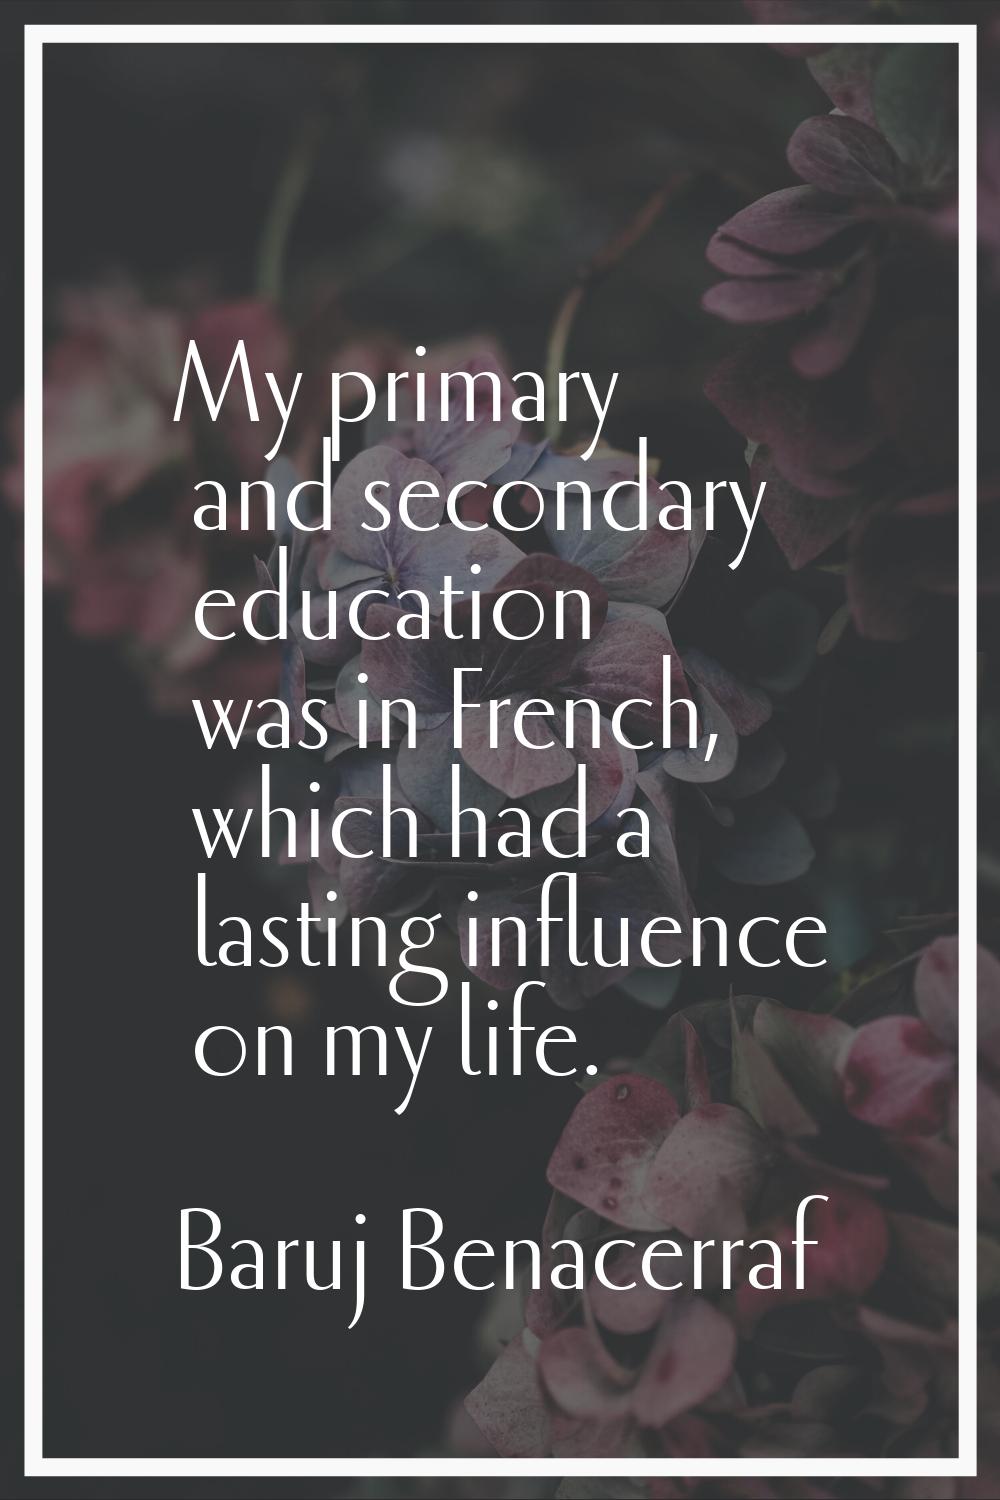 My primary and secondary education was in French, which had a lasting influence on my life.